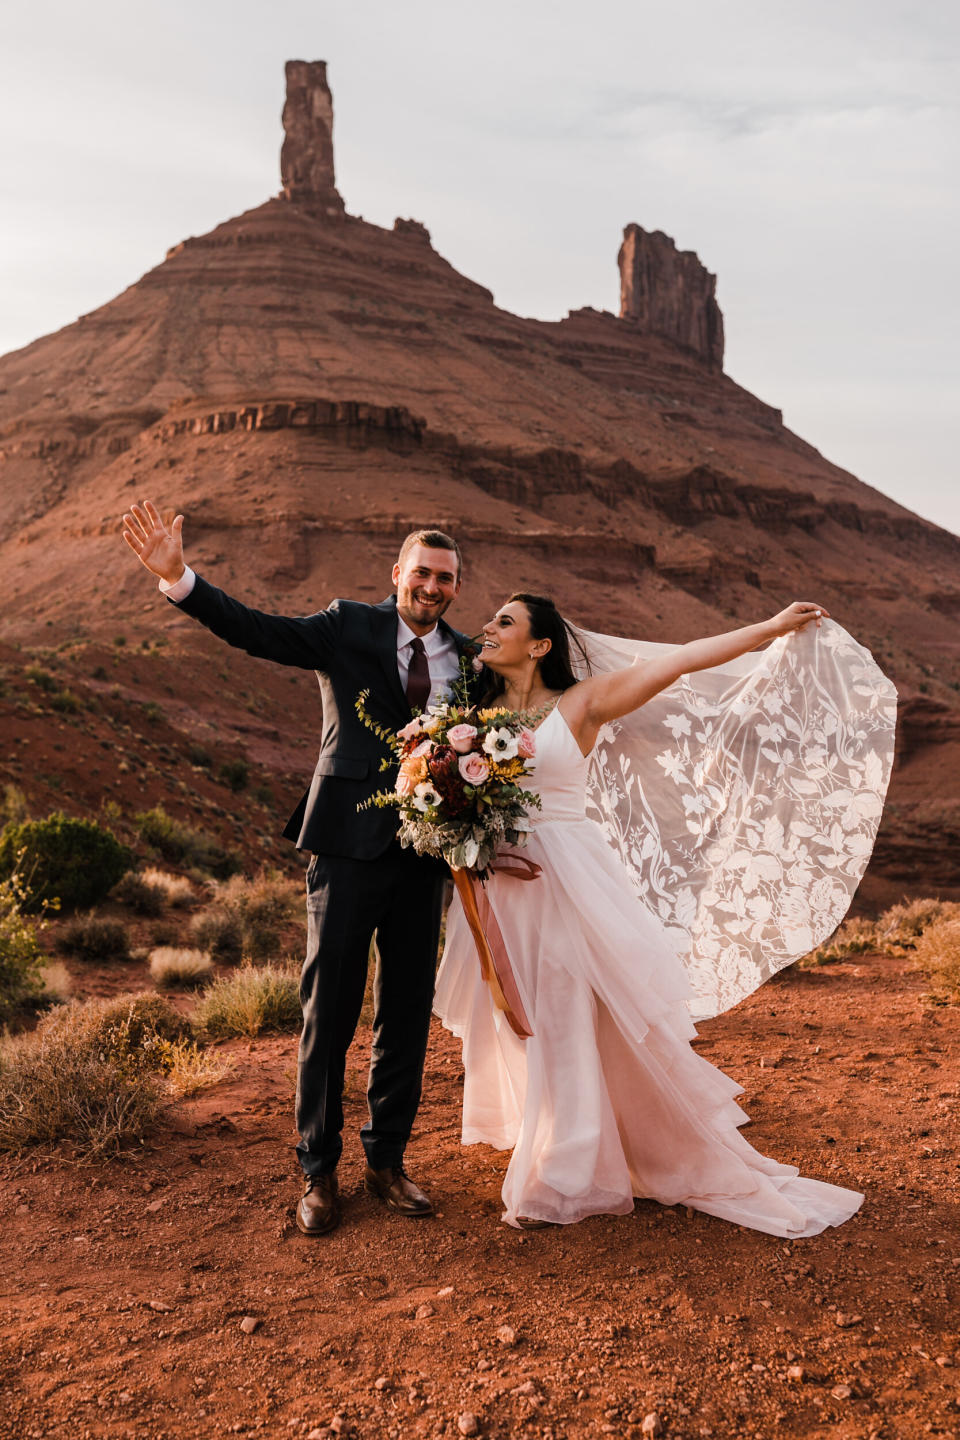 The two eloped in Moab, Utah, with just a few family members present. (Photo: <a href="https://thehearnes.com/" target="_blank">The Hearnes </a>)